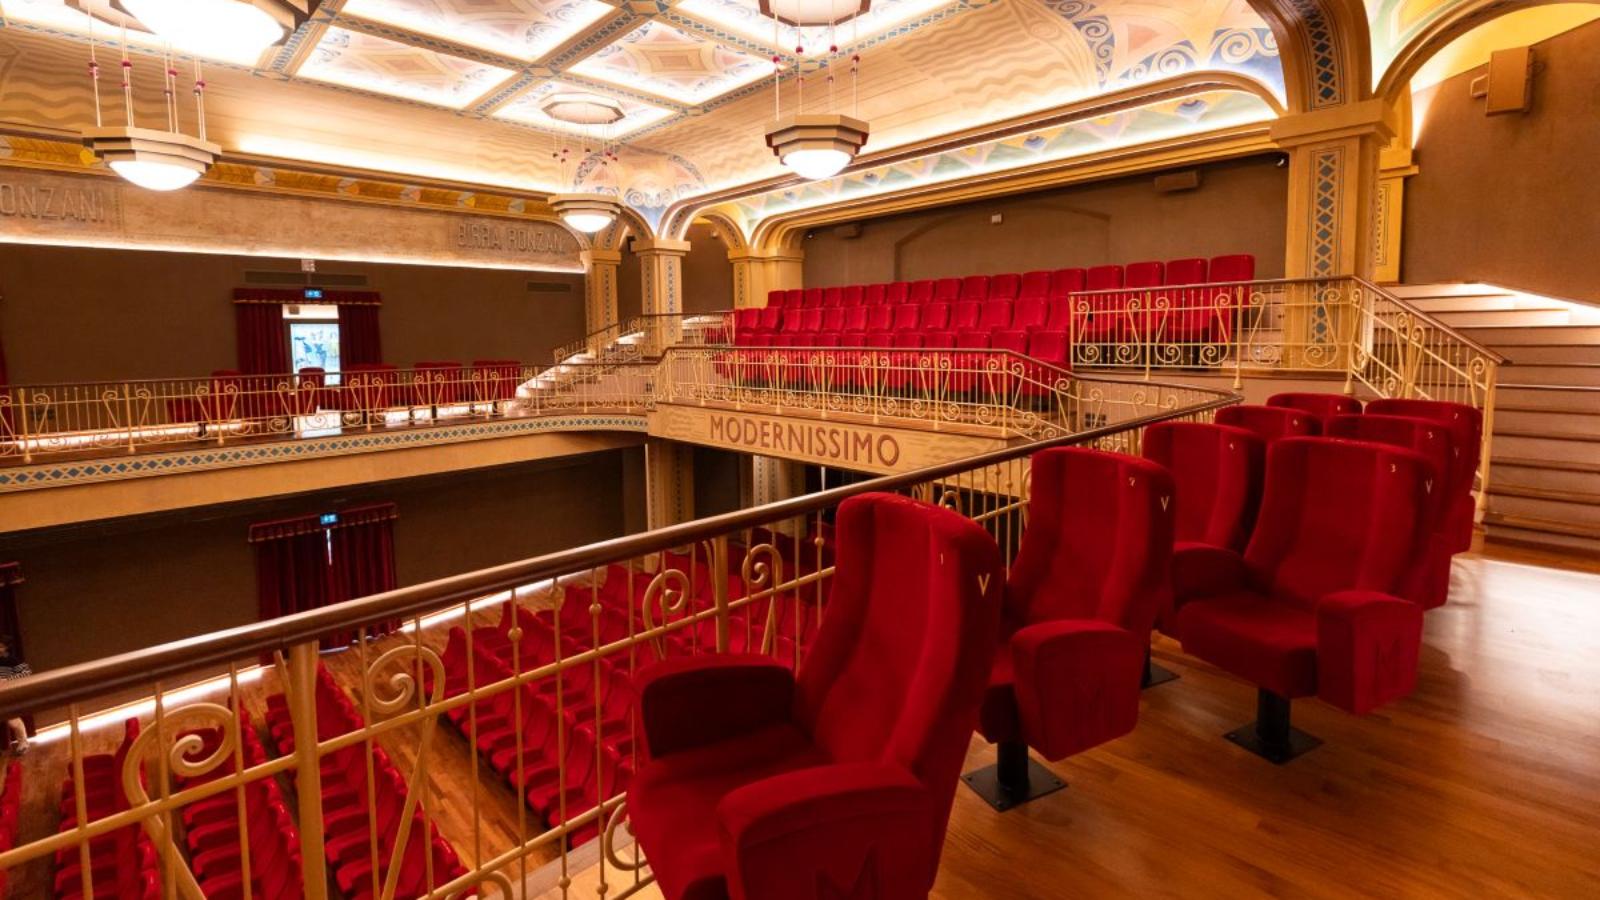 Enjoy a film in the restored Modernissimo